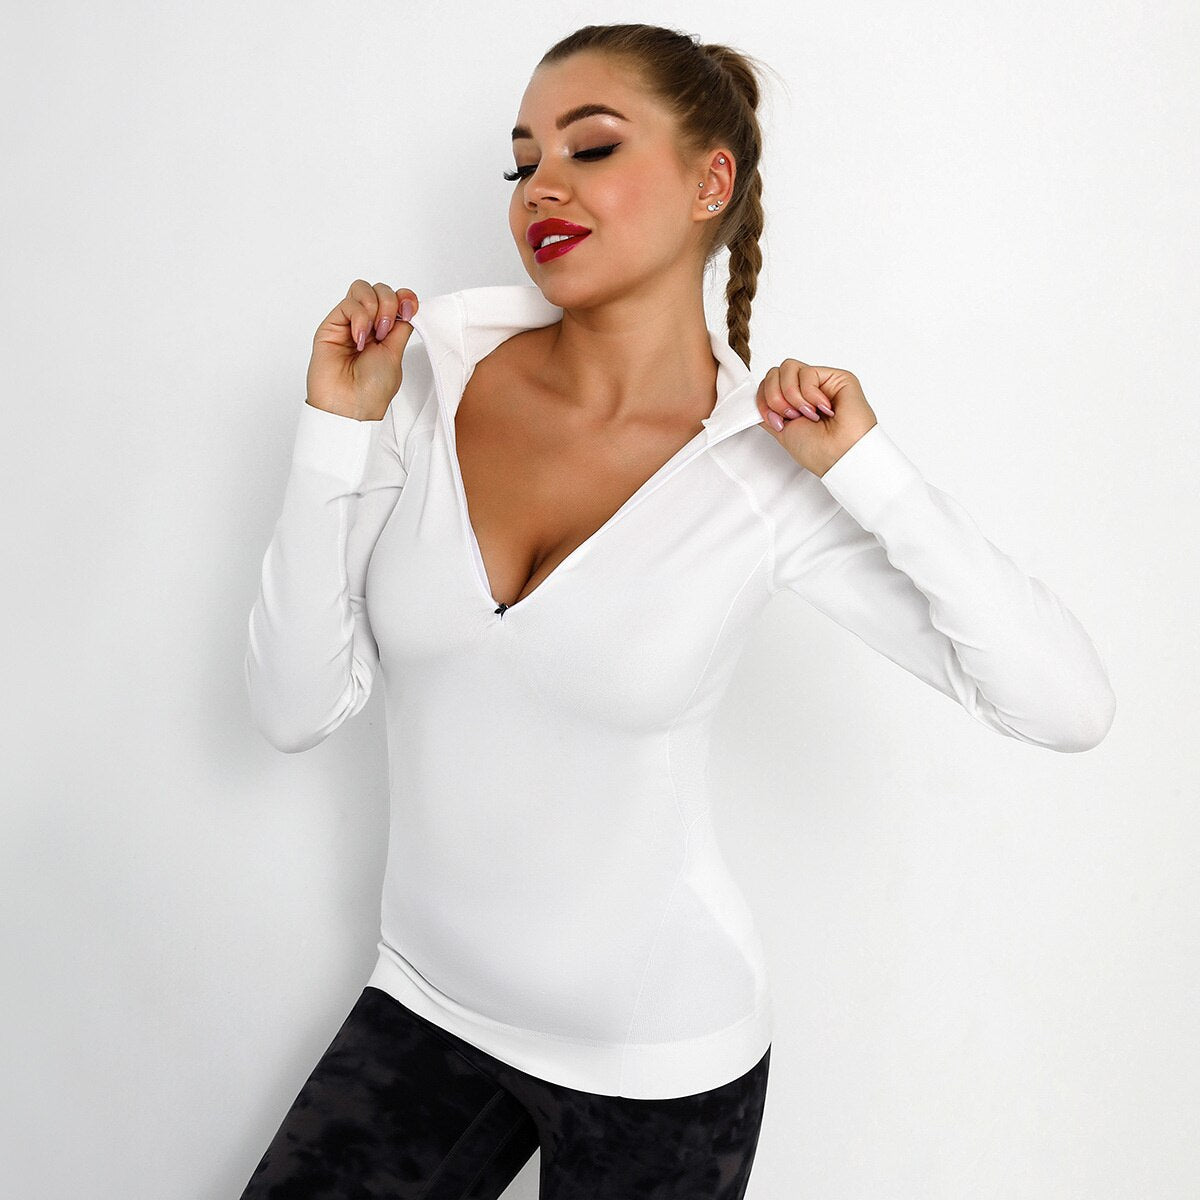 Running Sports Top Women Long Sleeve Zipper Pocket Gym Shirt Fitness Sweater Workout Athletic Active Quick Drying Yoga Blouse